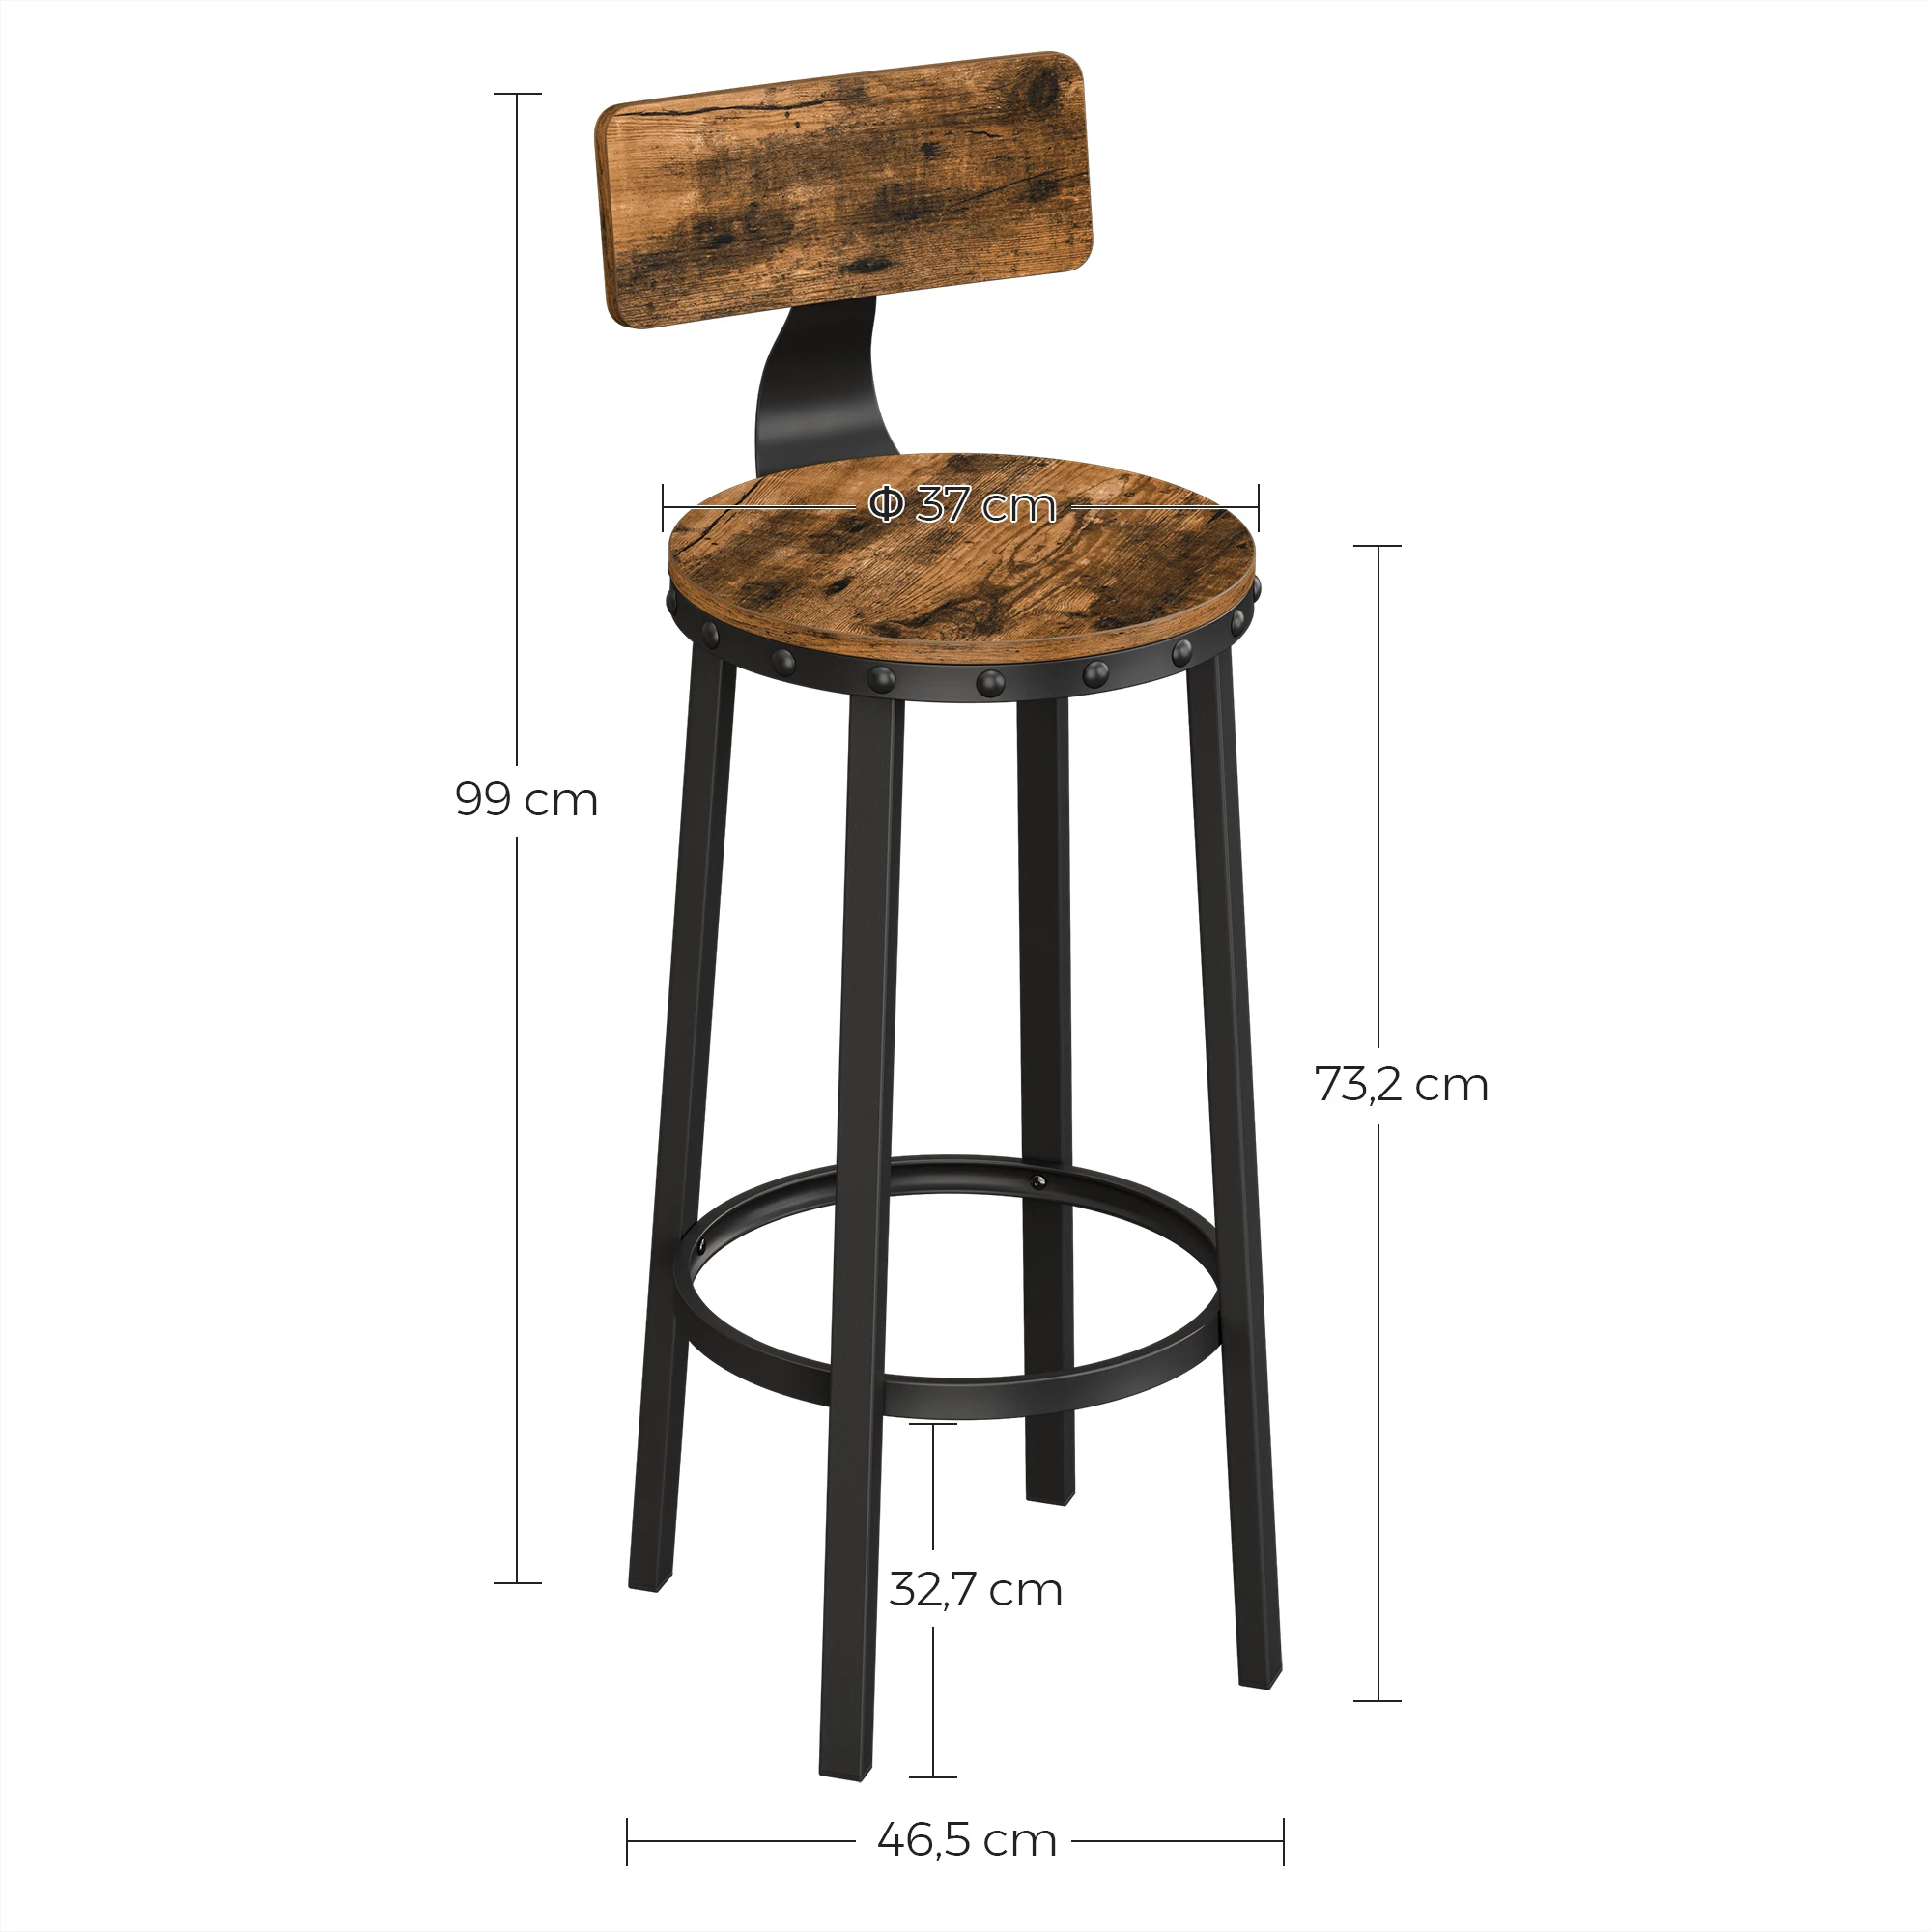 
Wholesale Bar Chairs Iron Tall table Antique Industrial Vintage Kitchen Swivel Wooden Cheap High Stool Bar Chairs 